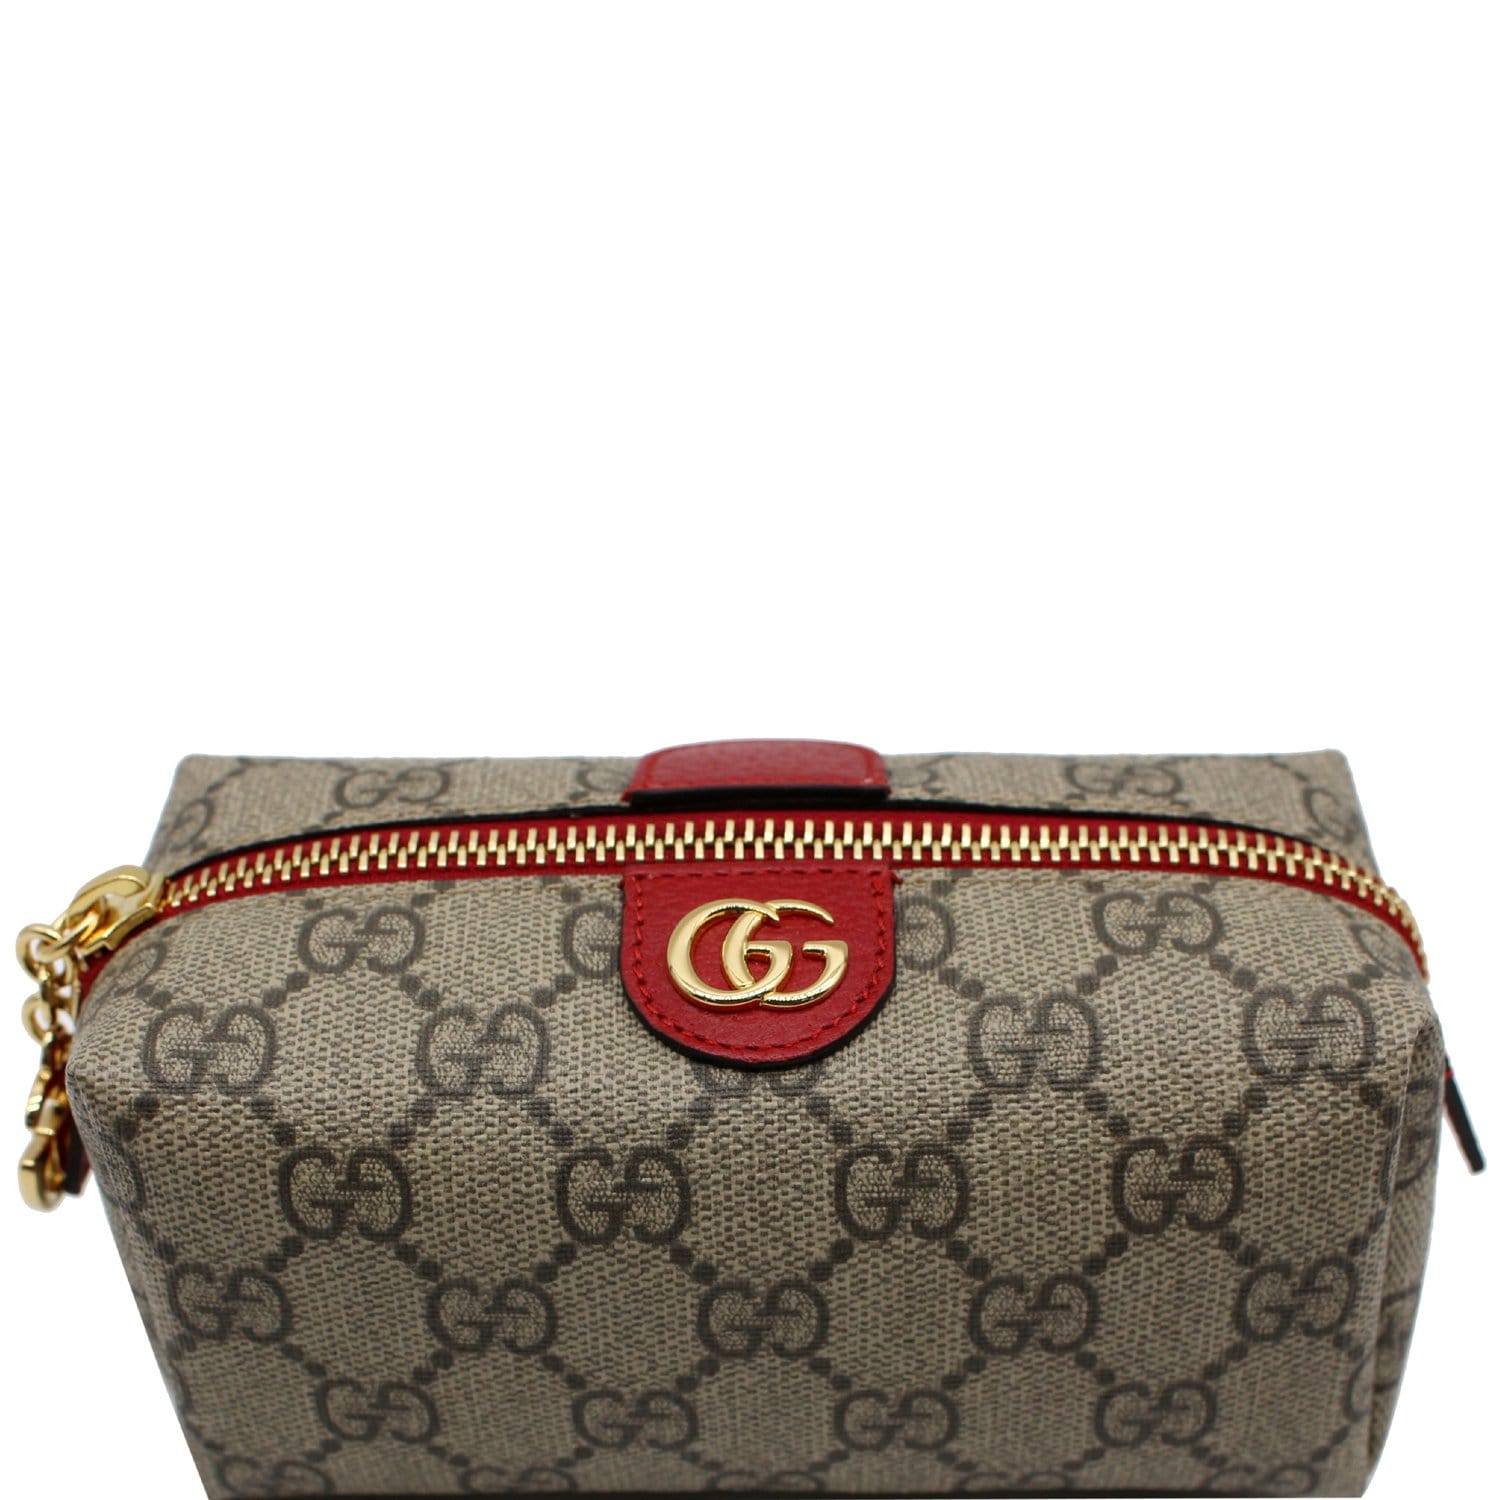 Ophidia GG toiletry case in grey and black Supreme